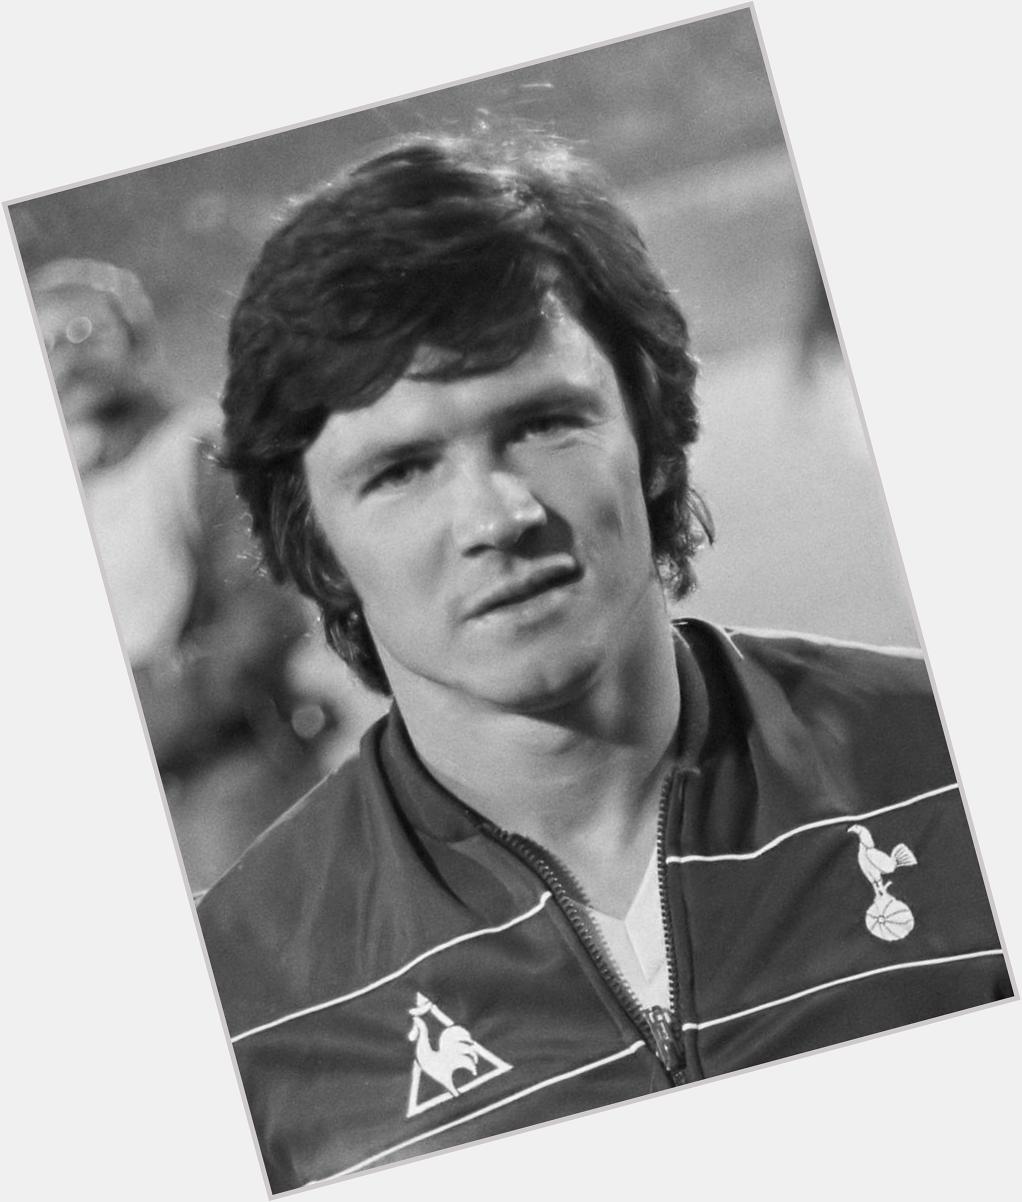 Happy Birthday to Tottenham legend Steve Perryman! The 63 year-old was capped over 600 times for the club. 